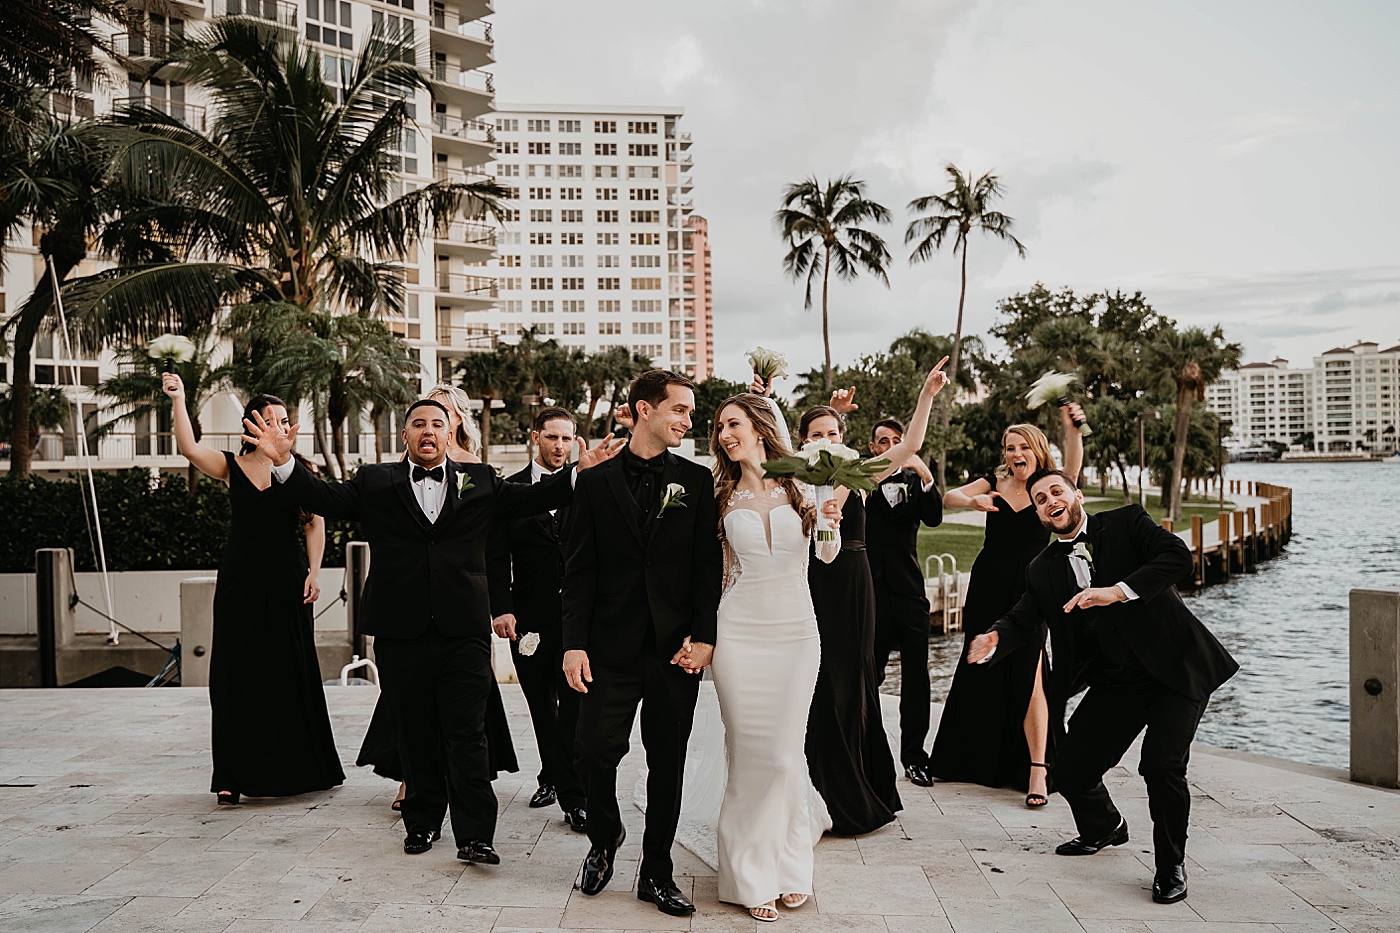 Fun walking forward pic with the whole Bridal party Waterstone Resort and Marina Wedding captured by South Florida Wedding Photographer Krystal Capone Photography